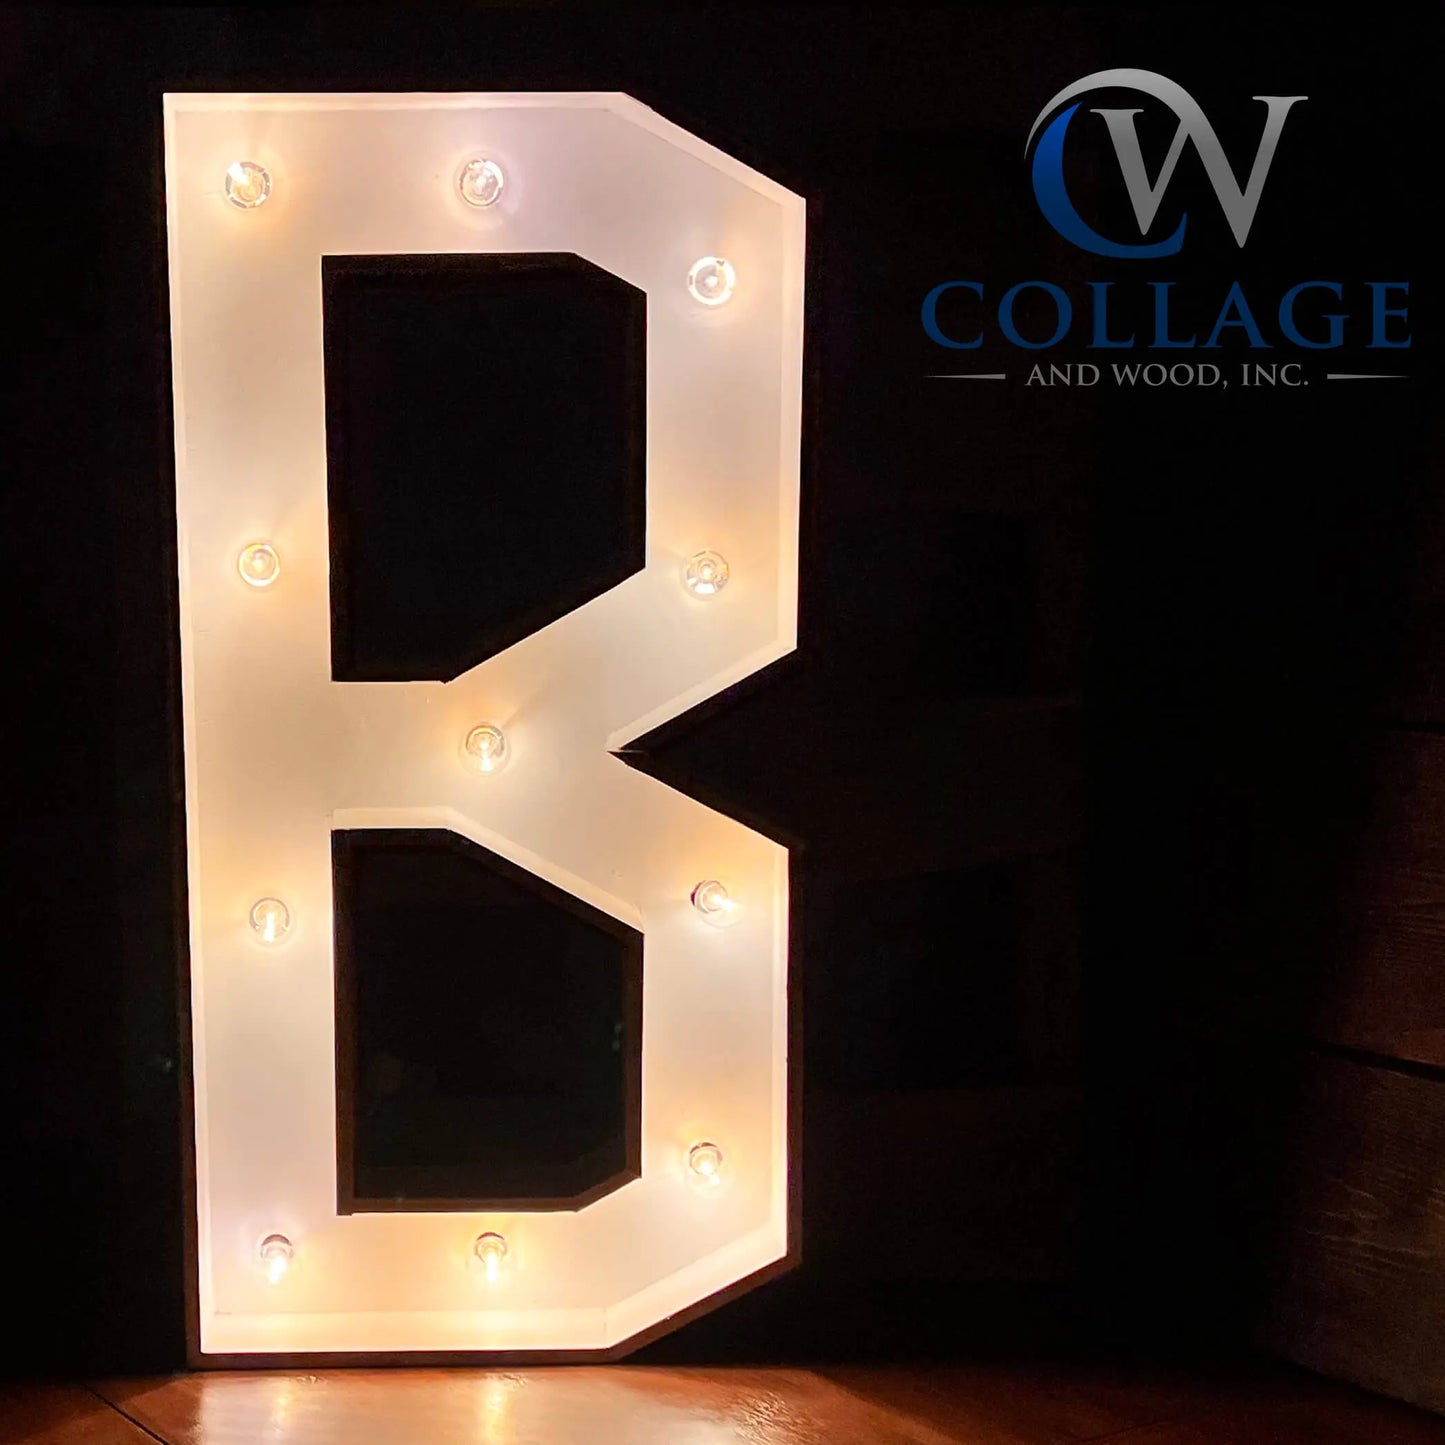 B - Beautifully designed wooden marquee letter B, standing 3 feet tall in a striking white finish, illuminated by energy-efficient LED lights.